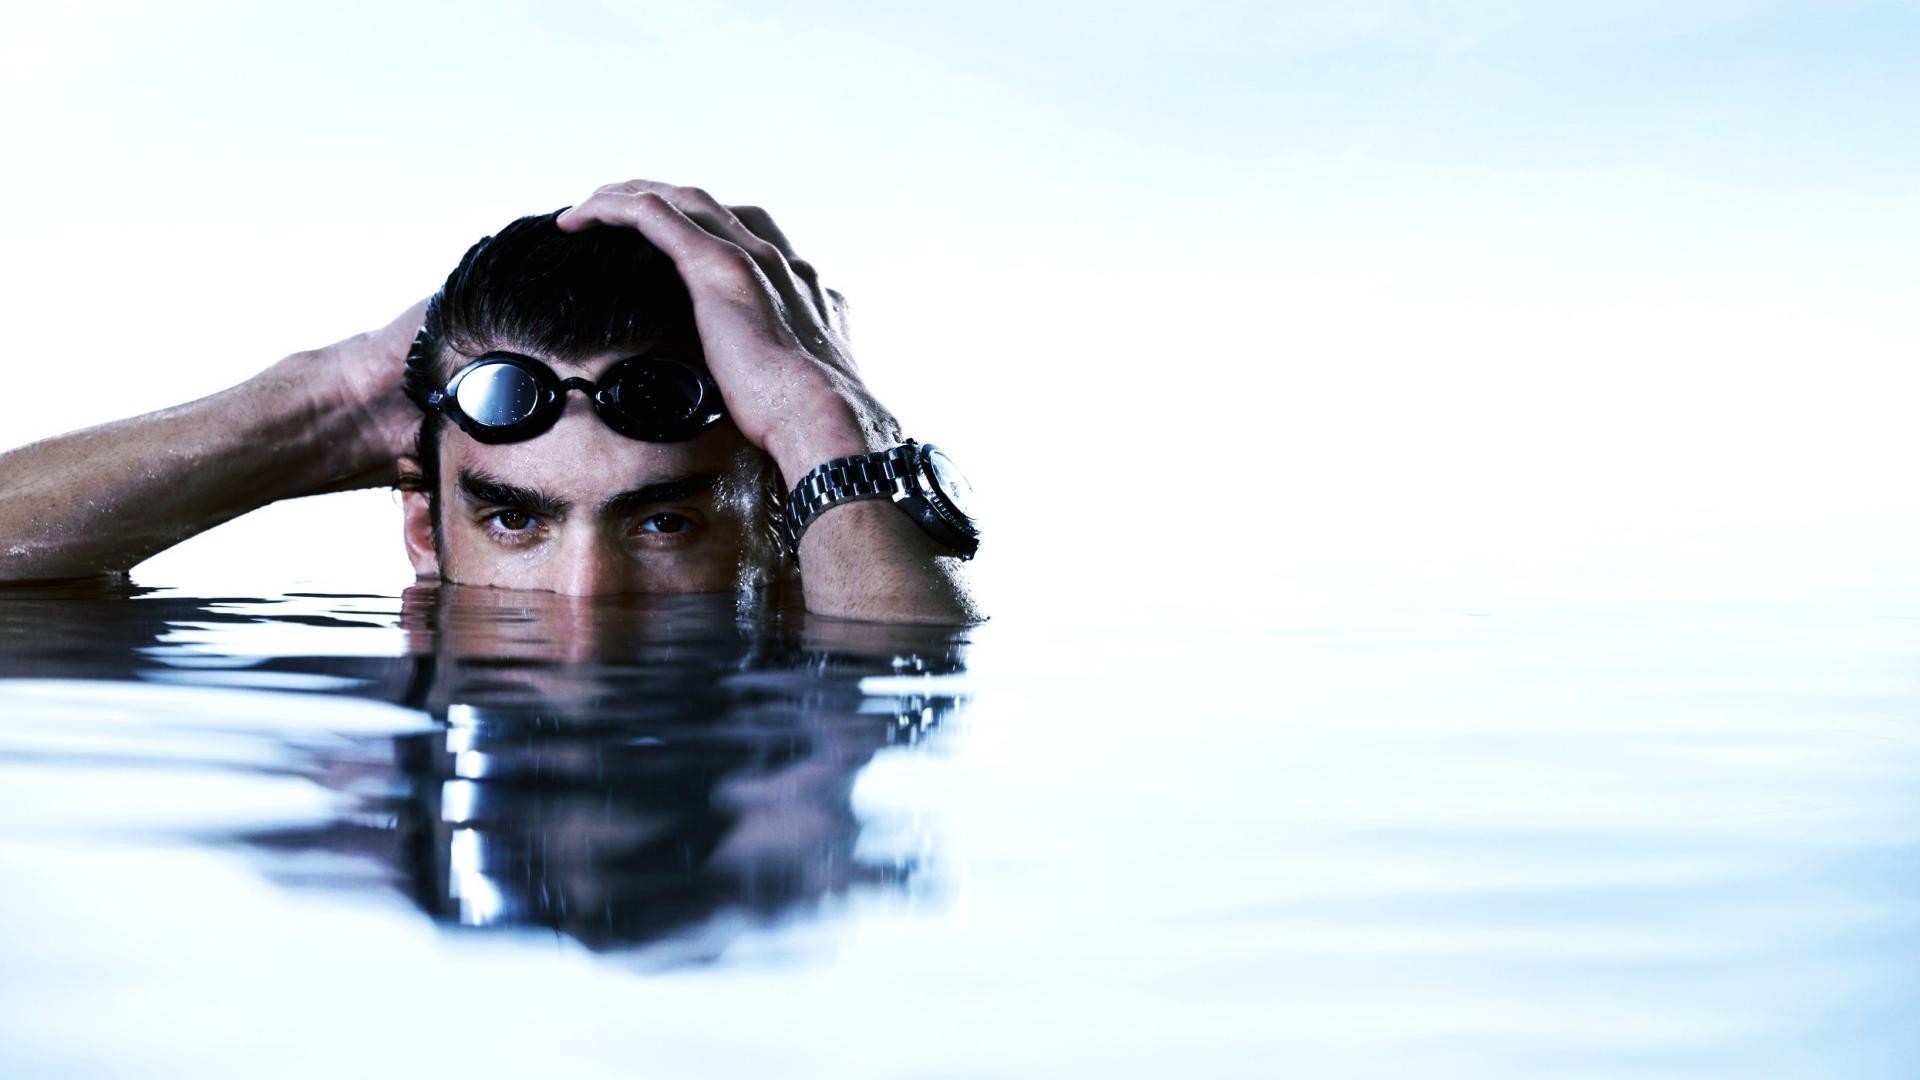 Michael Phelps, Wallpaper gallery, Extensive collection, Wide variety, 1920x1080 Full HD Desktop